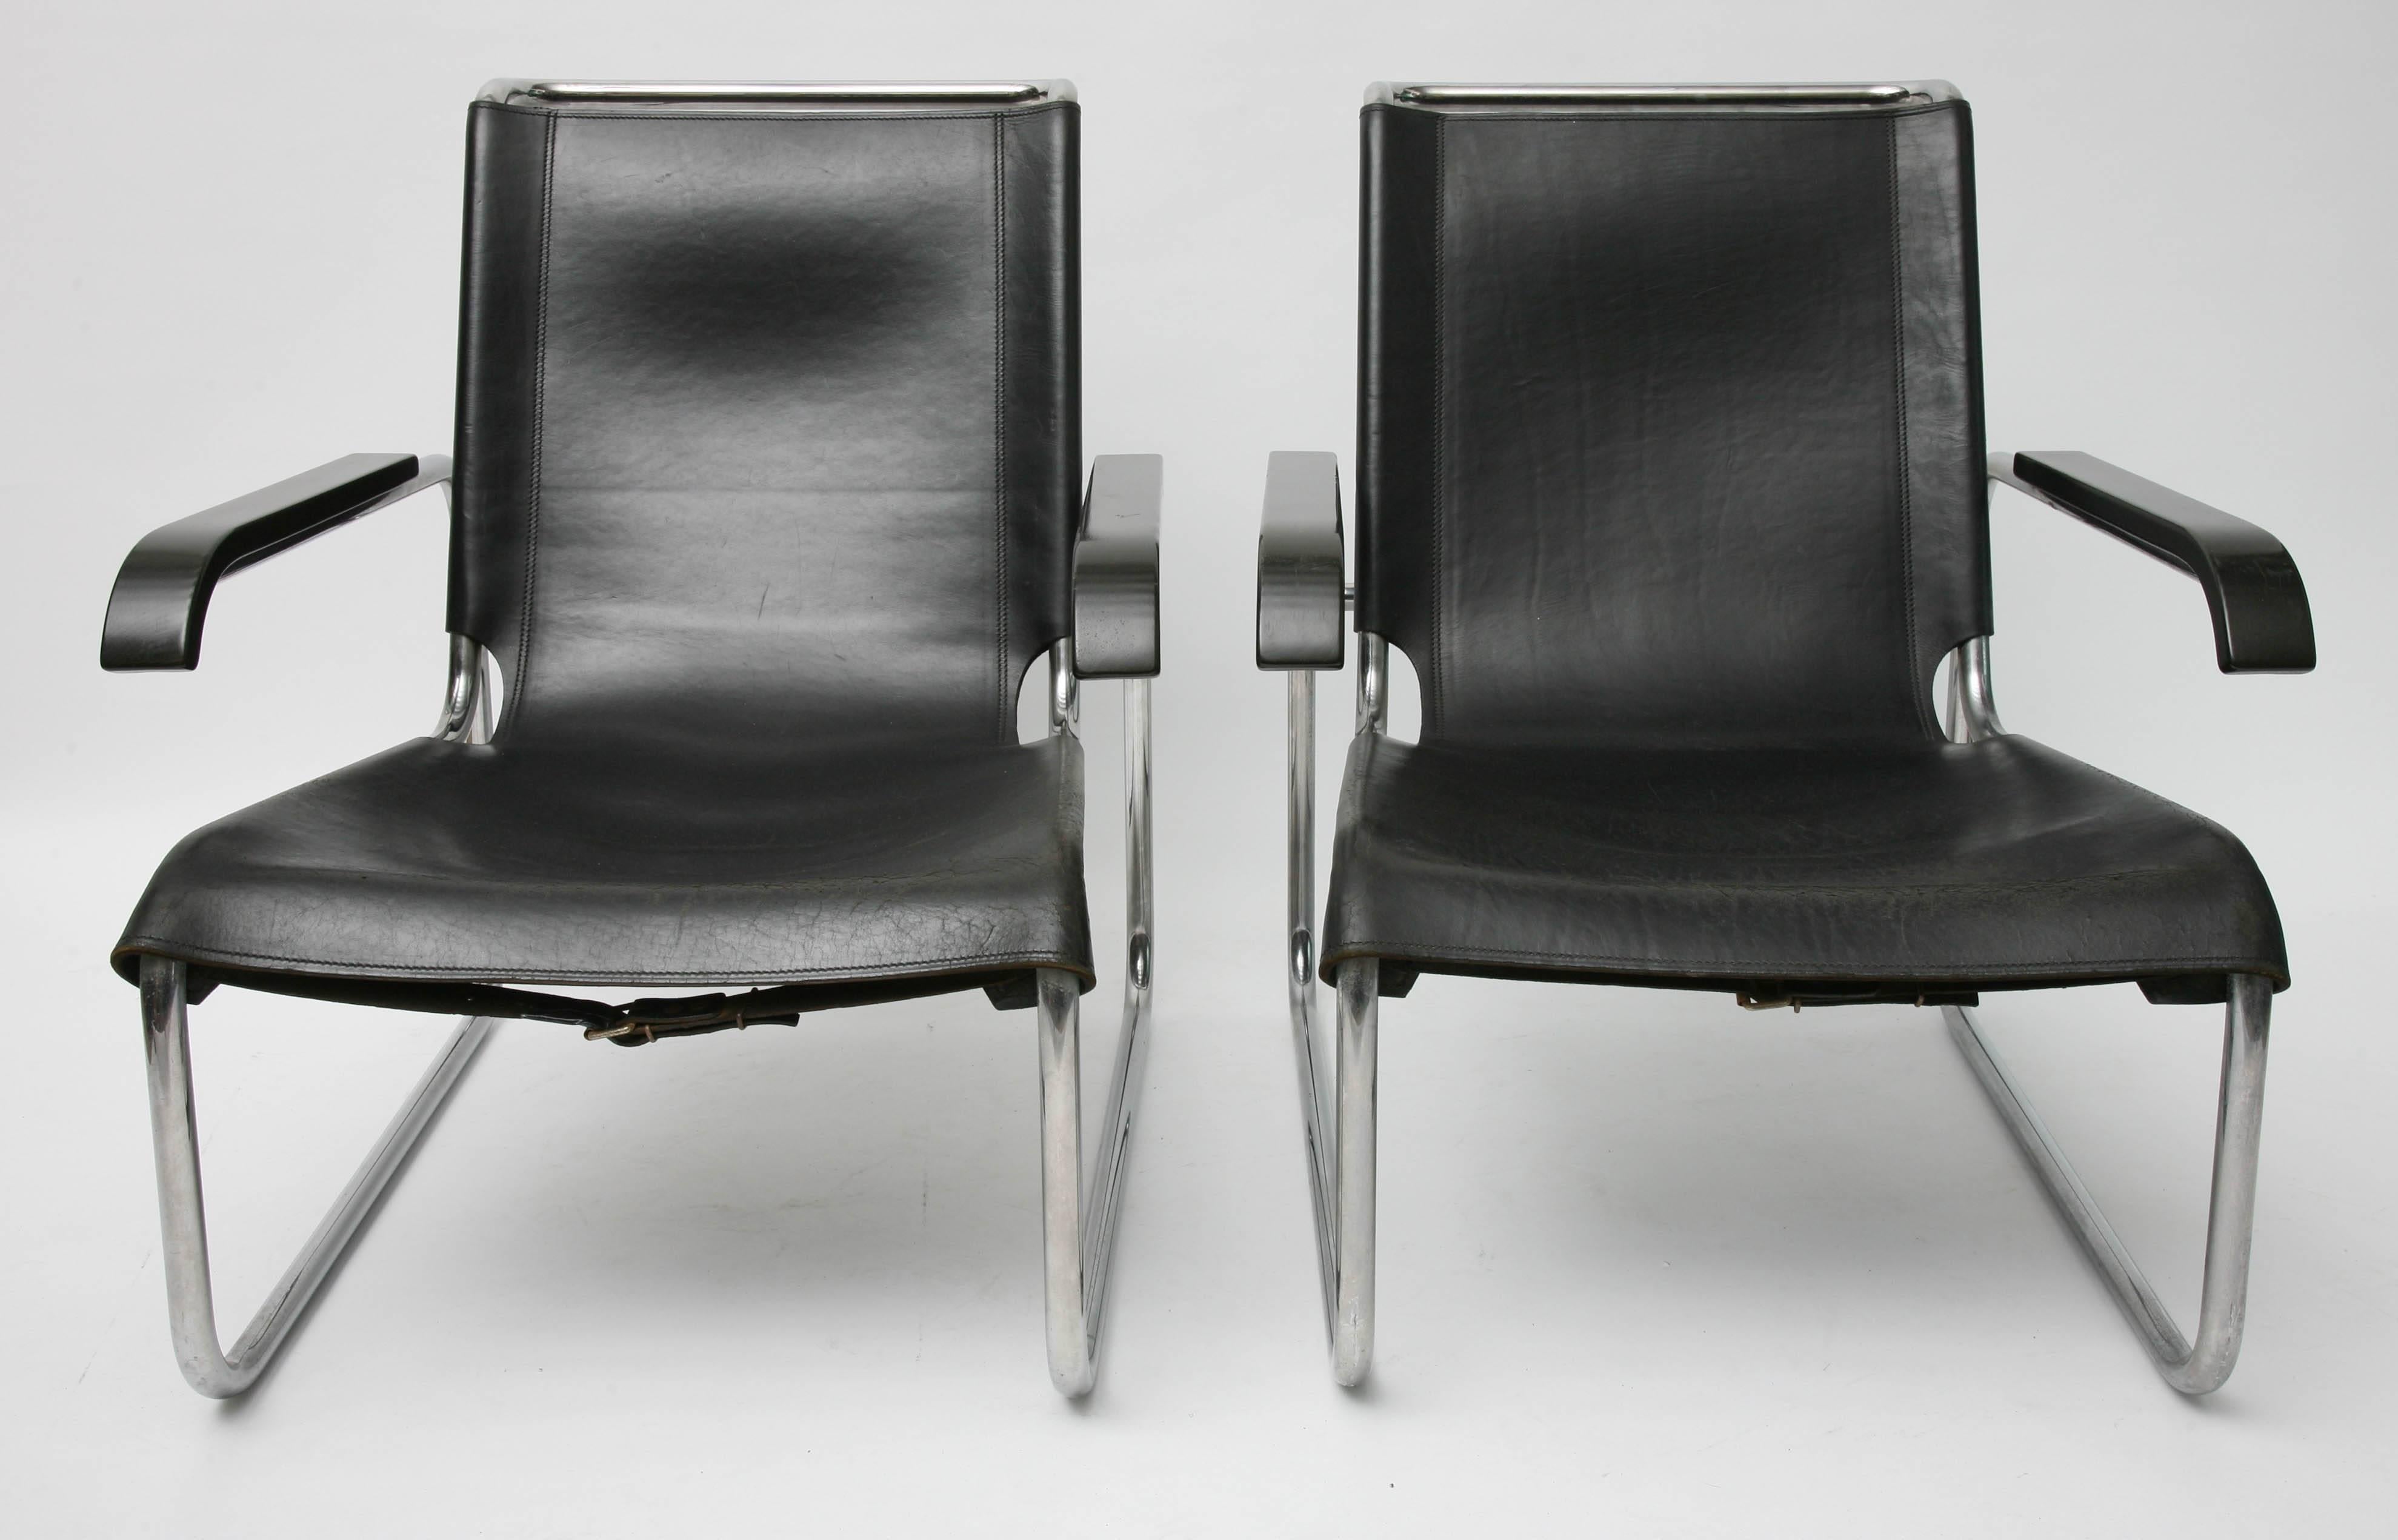 The B-35 lounge chairs were designed in 1929.
This set was manufactured in 1960 by Thonet and distributed by ICF.
Original leather, chrome and lacquered wood arms.